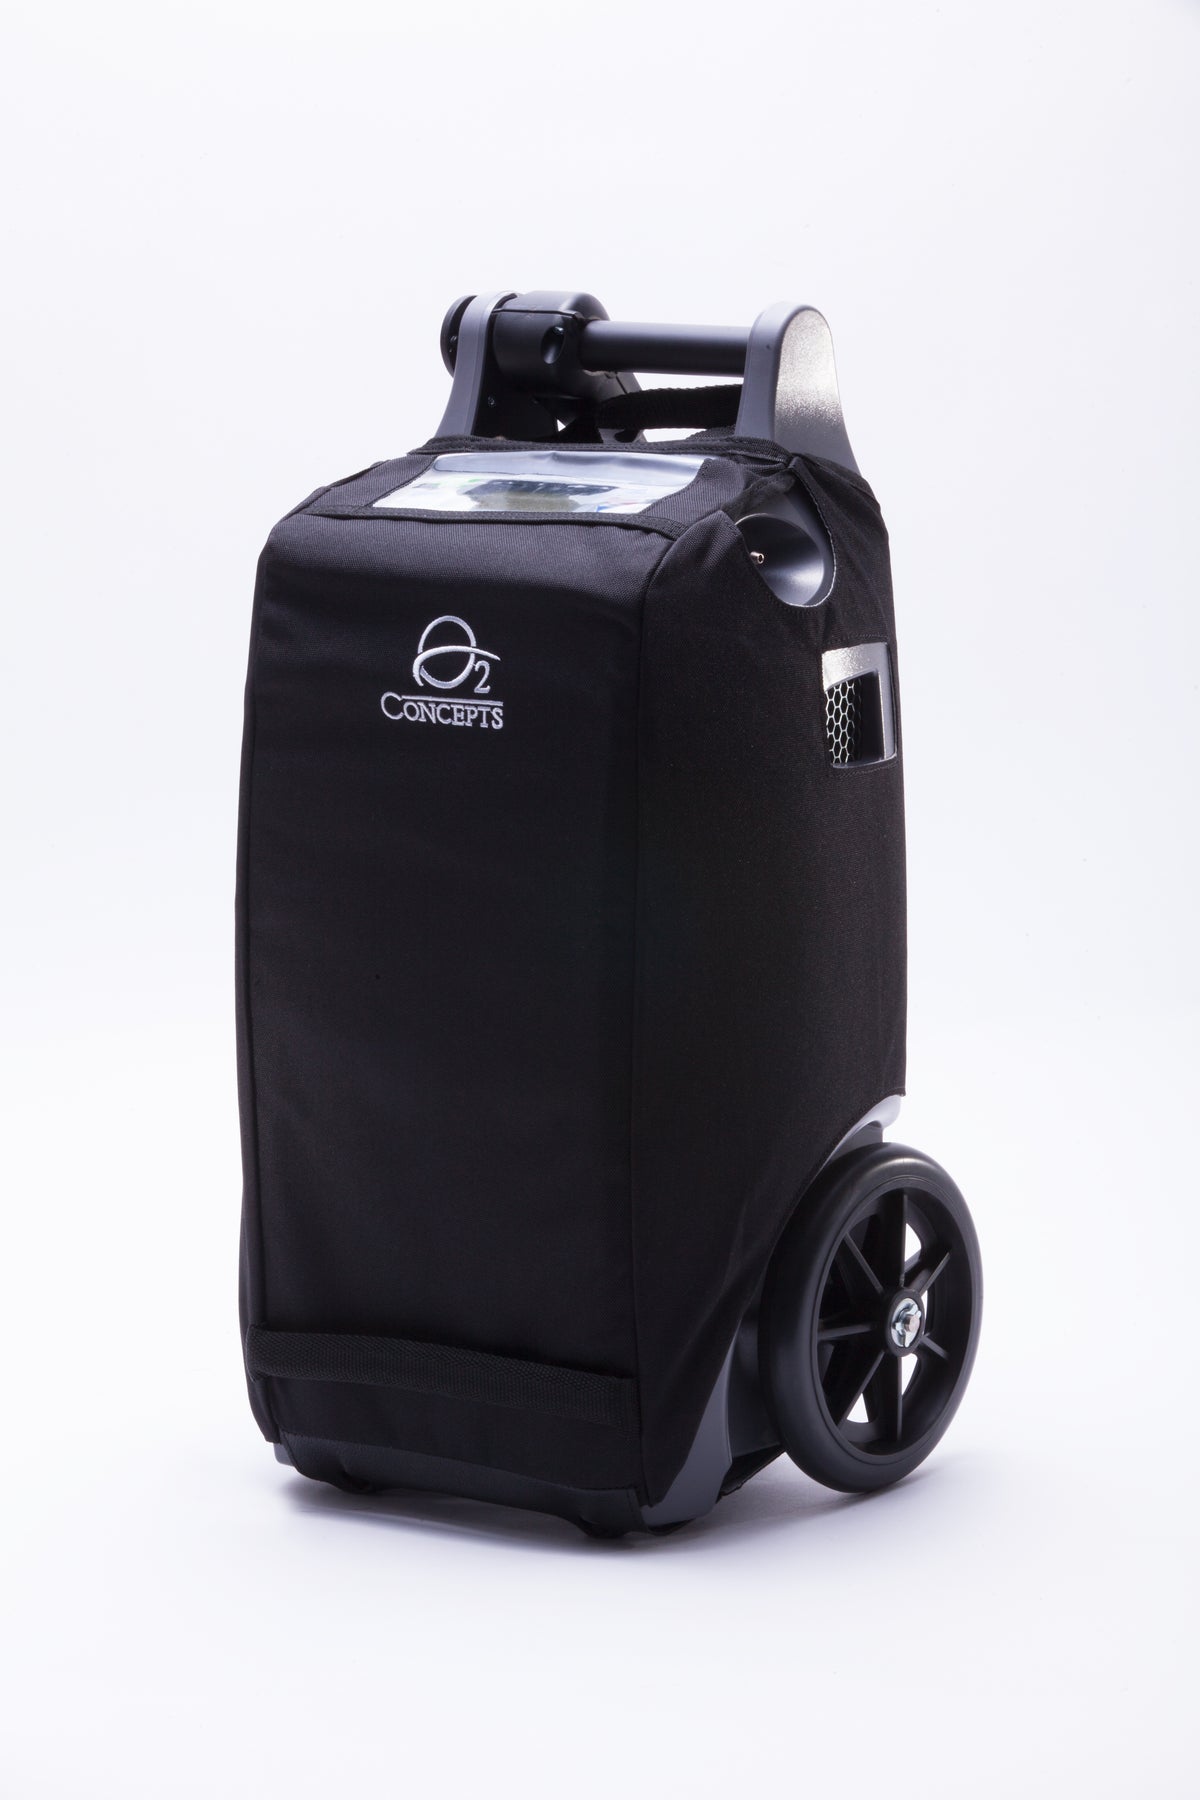 O2 Concepts - Oxlife Independence Portable Oxygen Concentrator POC - Continuous Flow